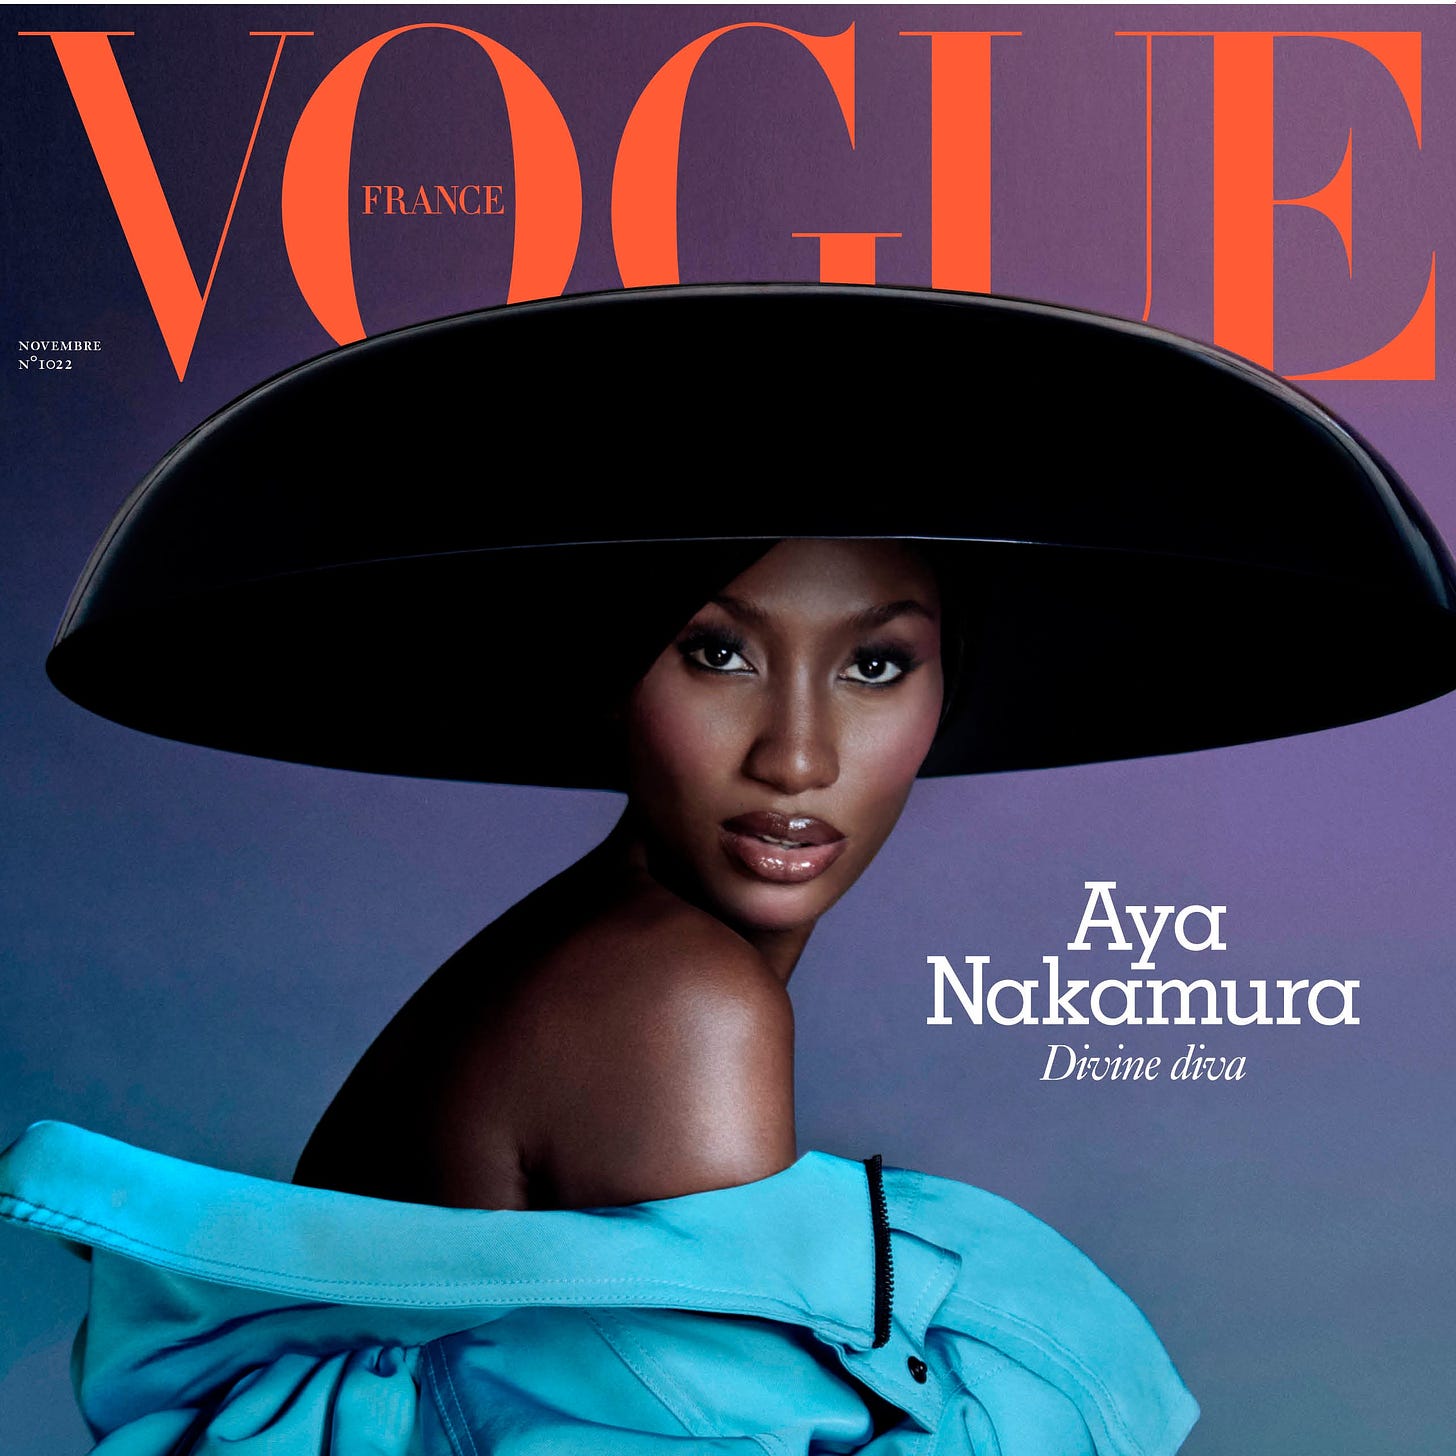 Aya Nakamura covers the first issue of Vogue France | Vogue France